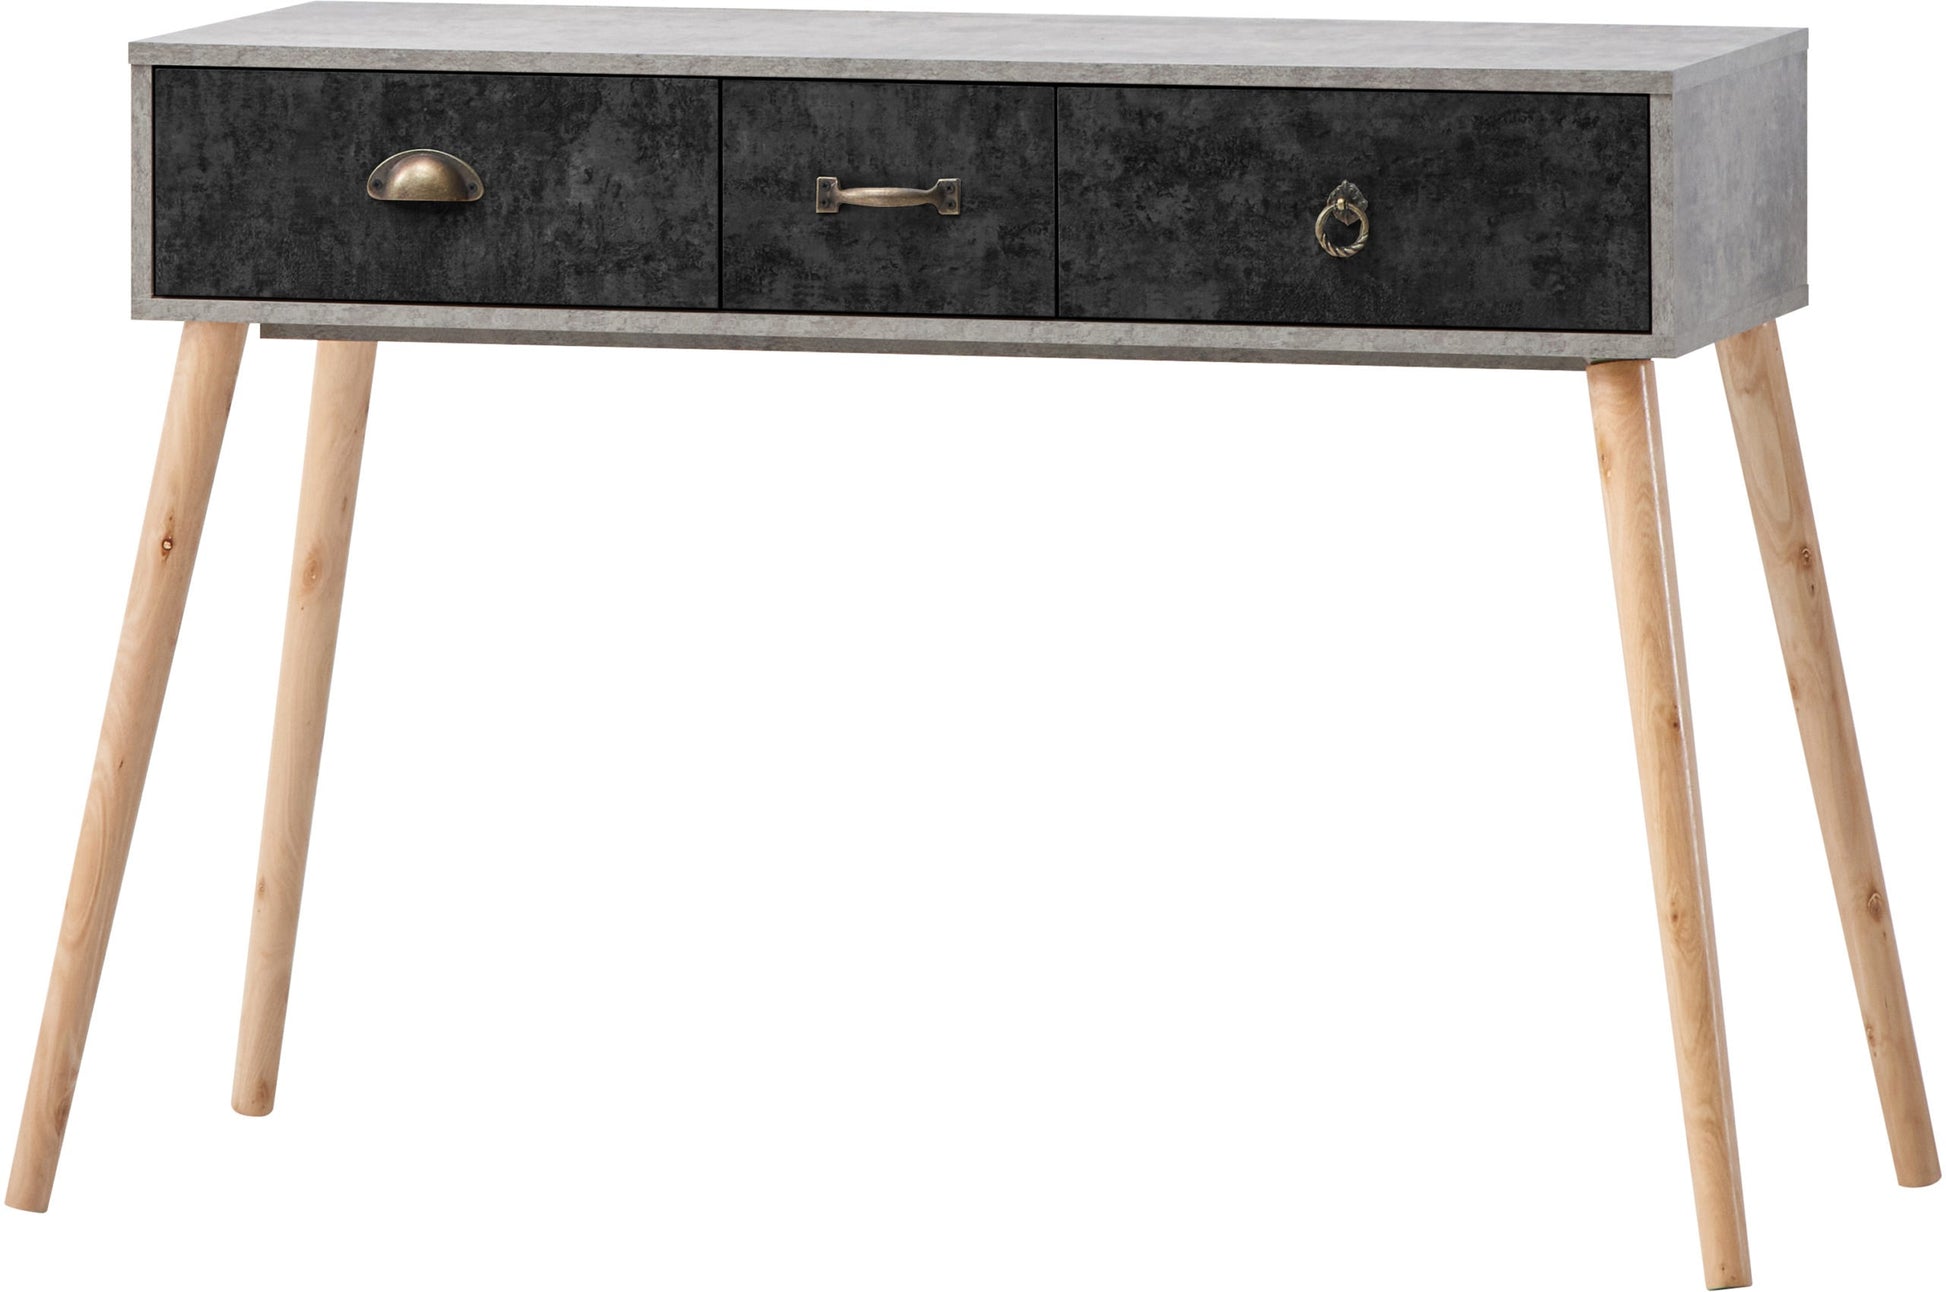 NORDIC-3-DRAWER-OCCASIONAL-TABLE-GREYCHARCOAL-CONCRETE-EFFECT-2021-100-120-020-F-scaled.jpg